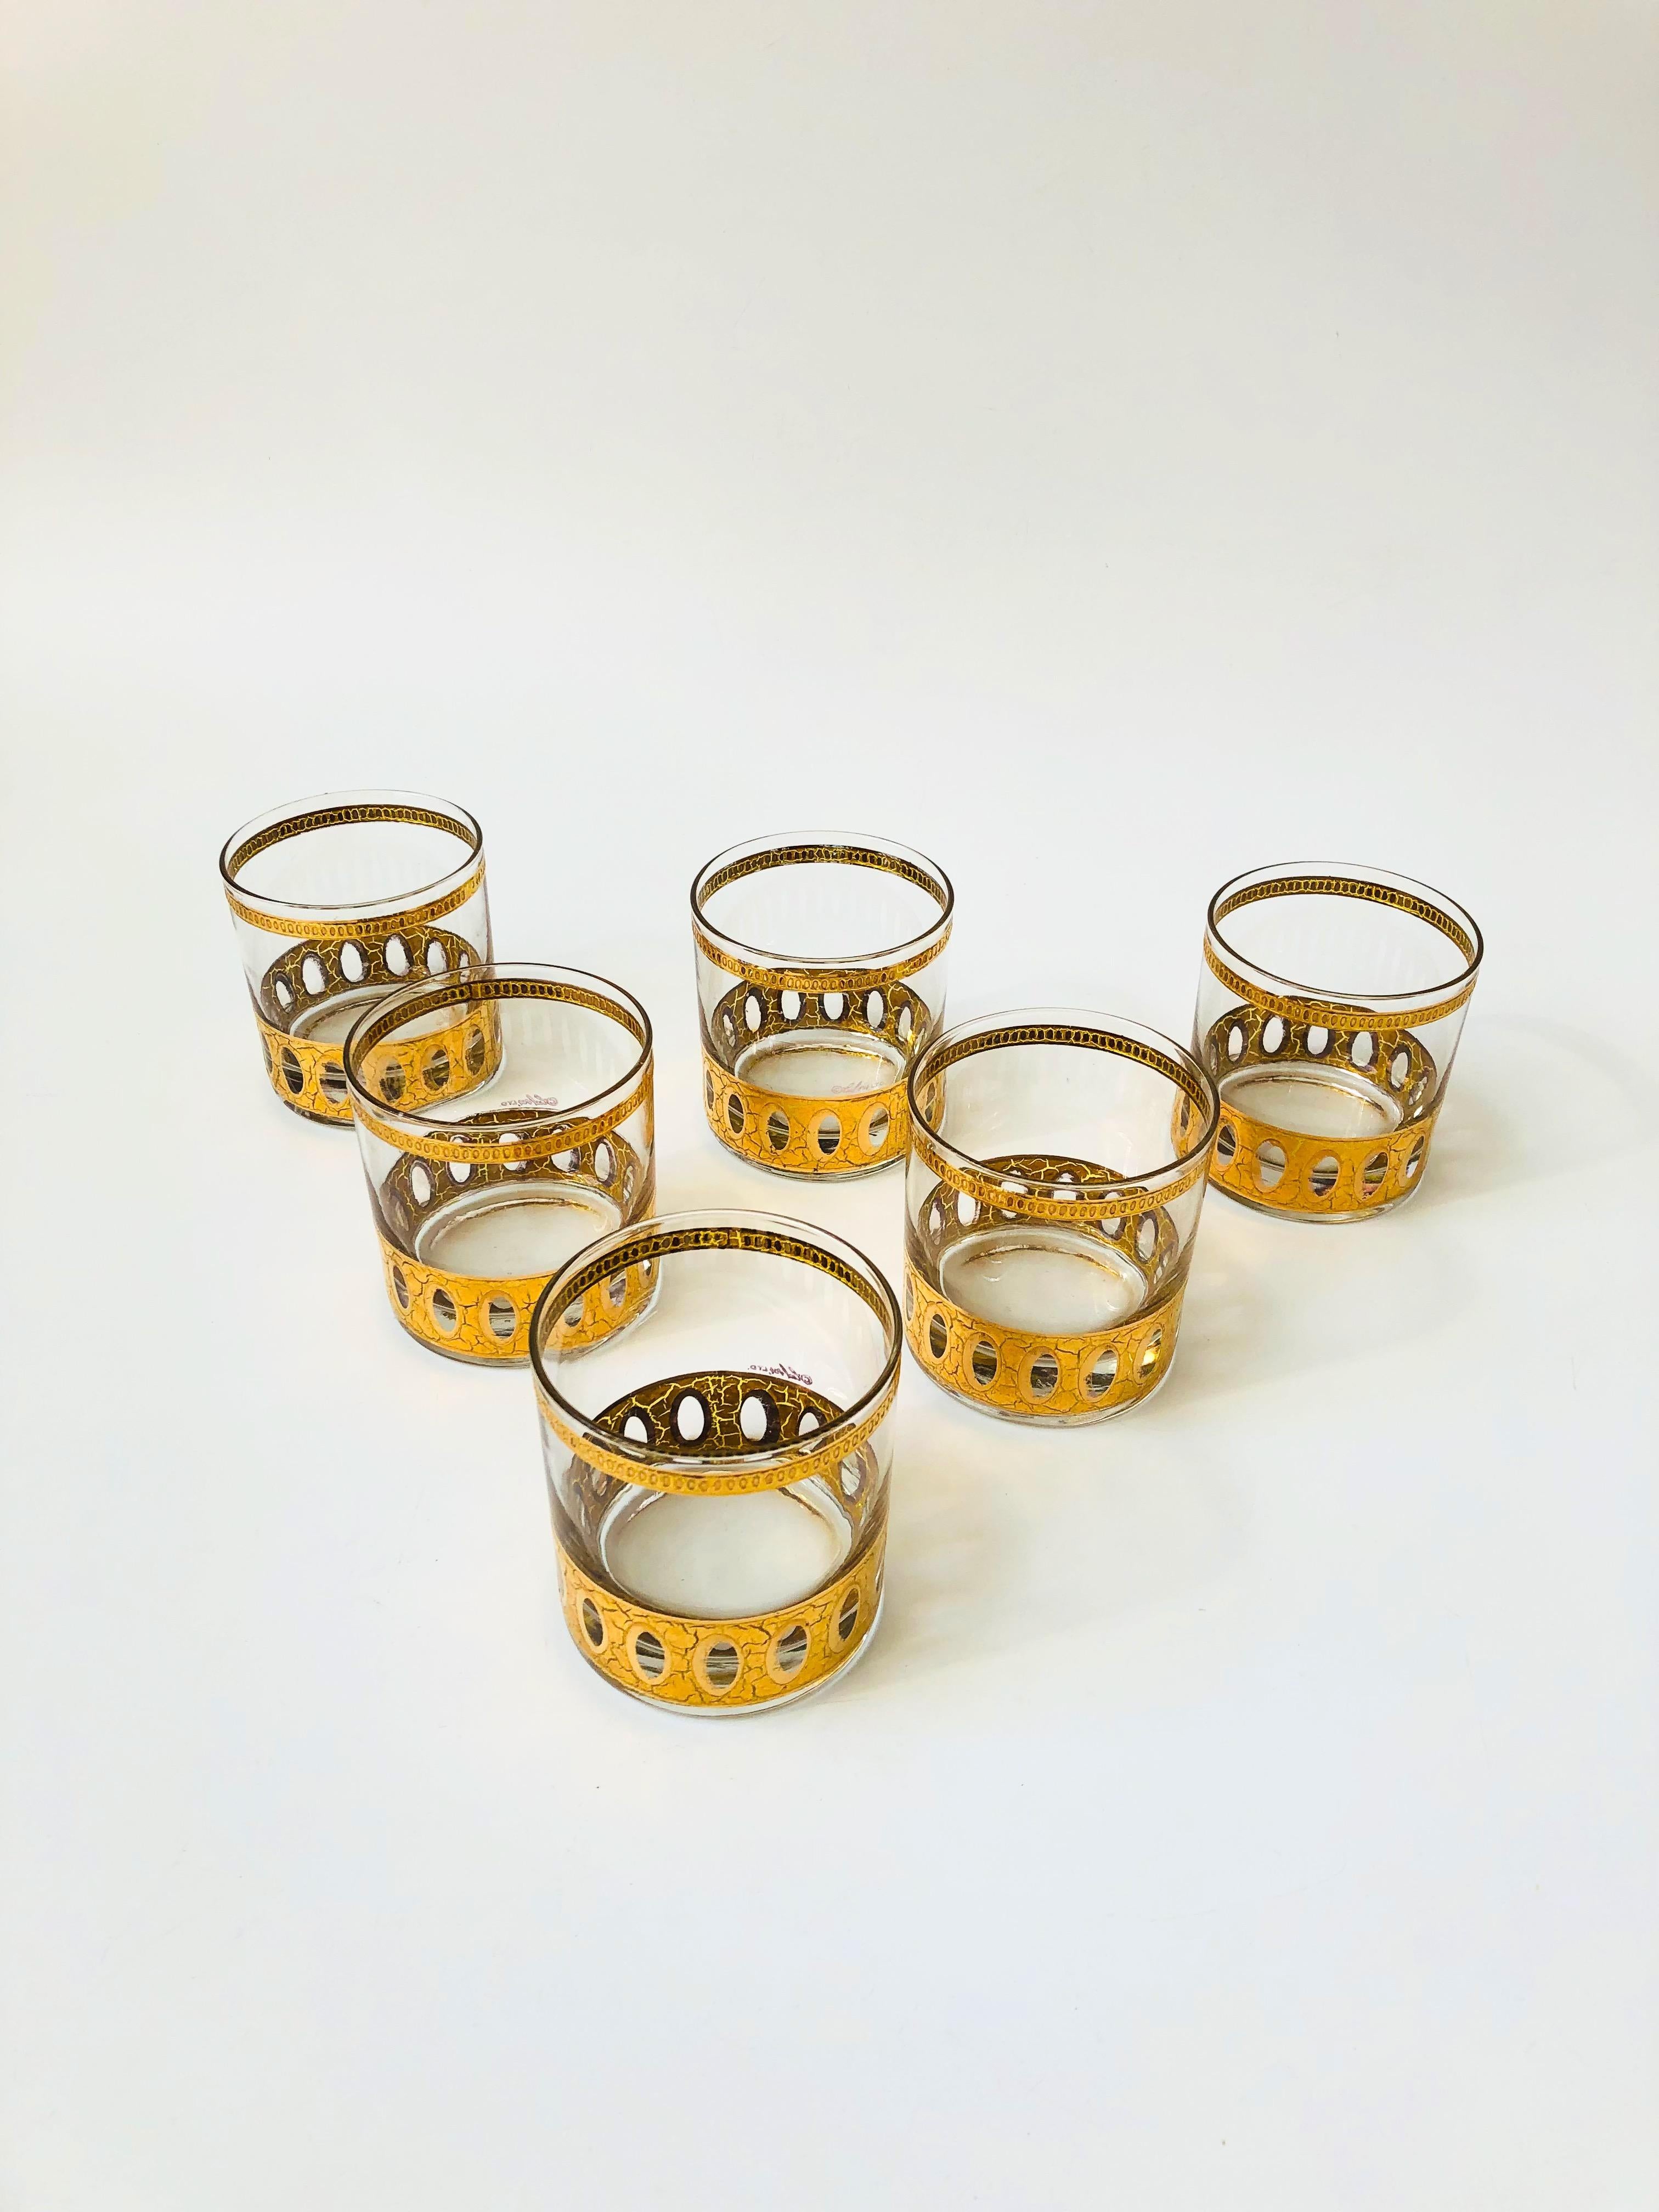 A set of 6 vintage lowball cocktail glasses by Culver. Each piece is wrapped in a beautiful 22 kt gold in the 